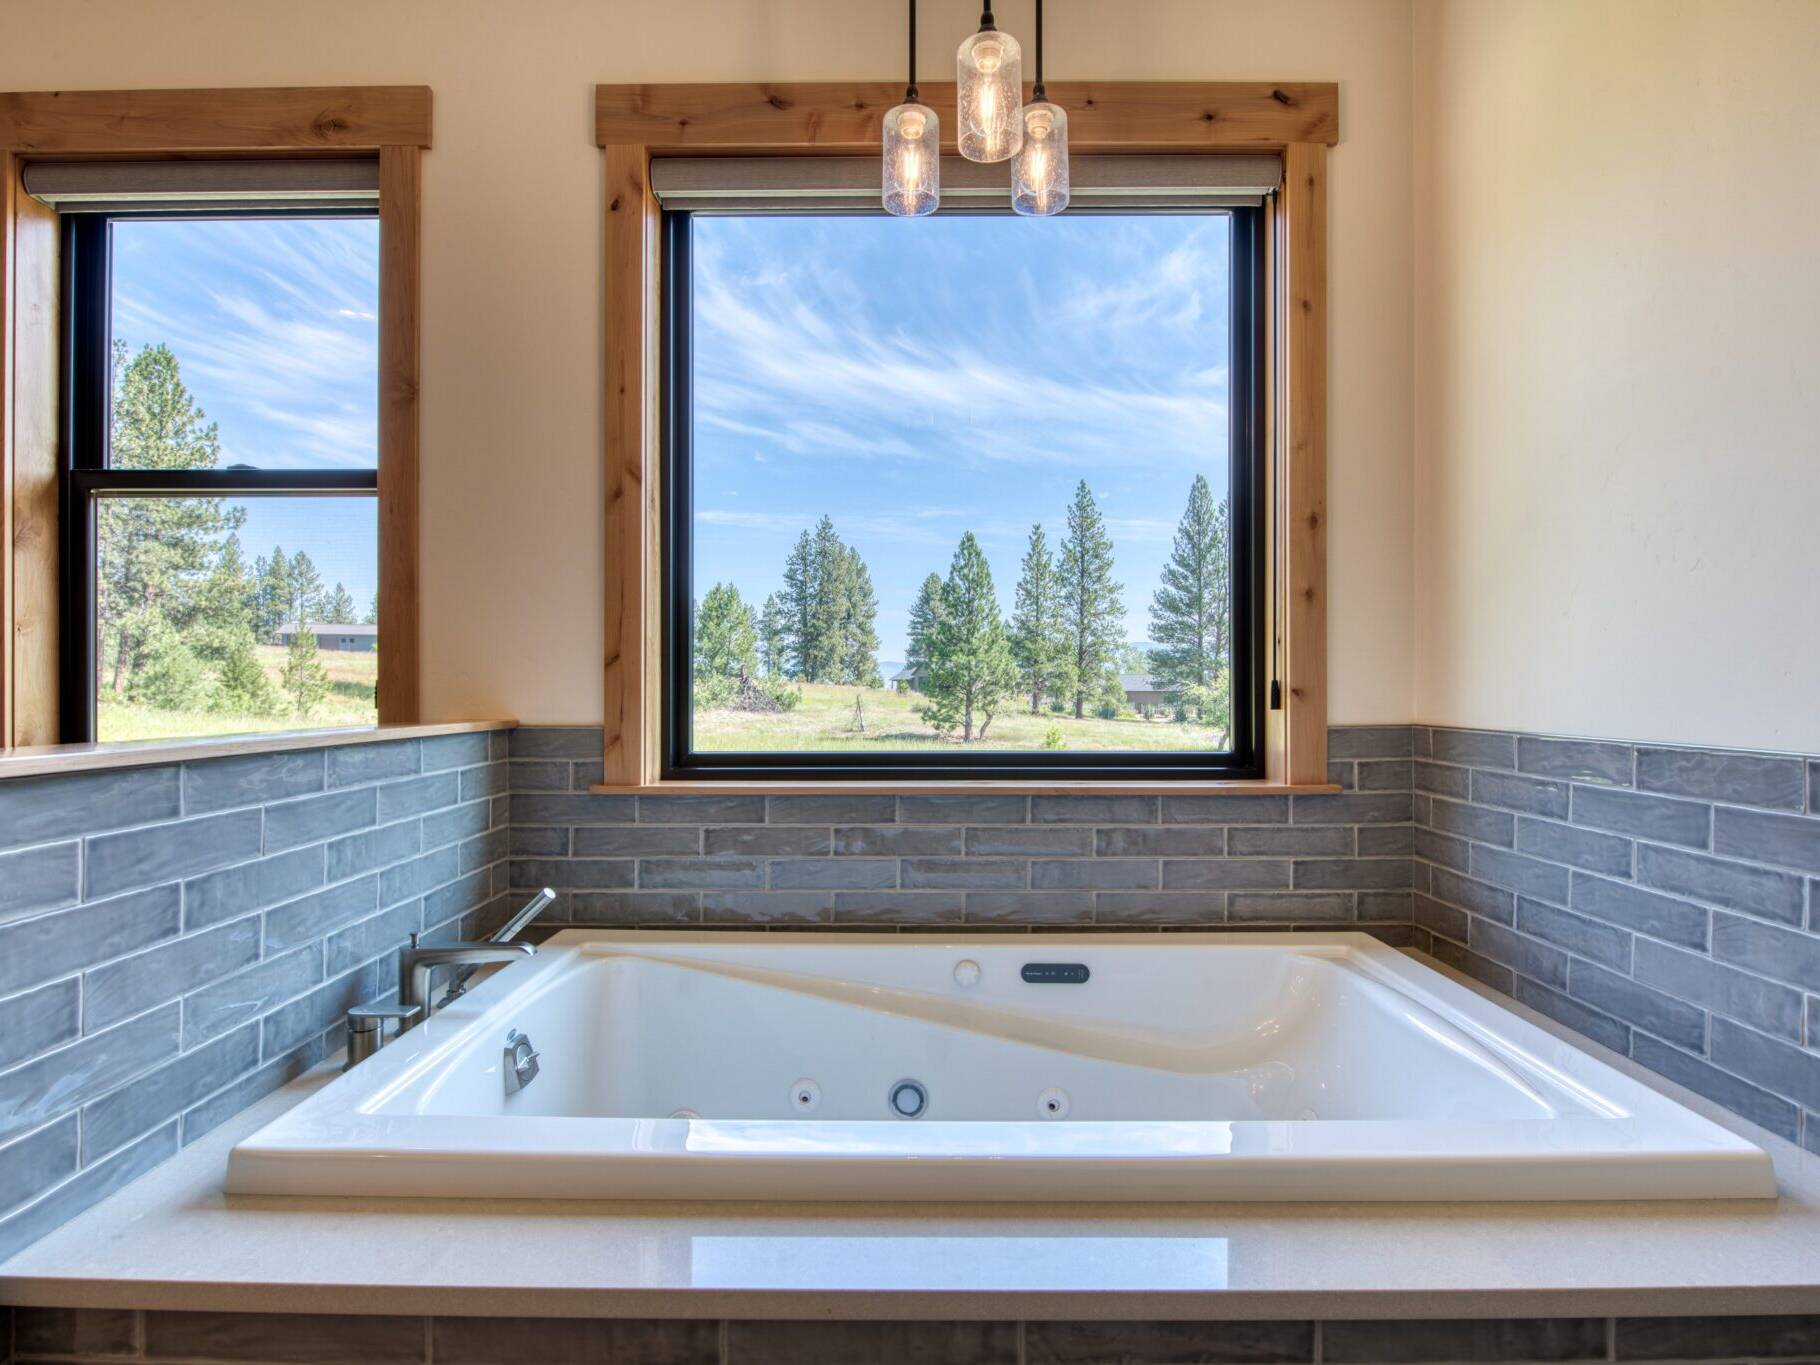 Jetted tub in a tiled tub deck in a custom home built by Big Sky Builders in Florence, MT